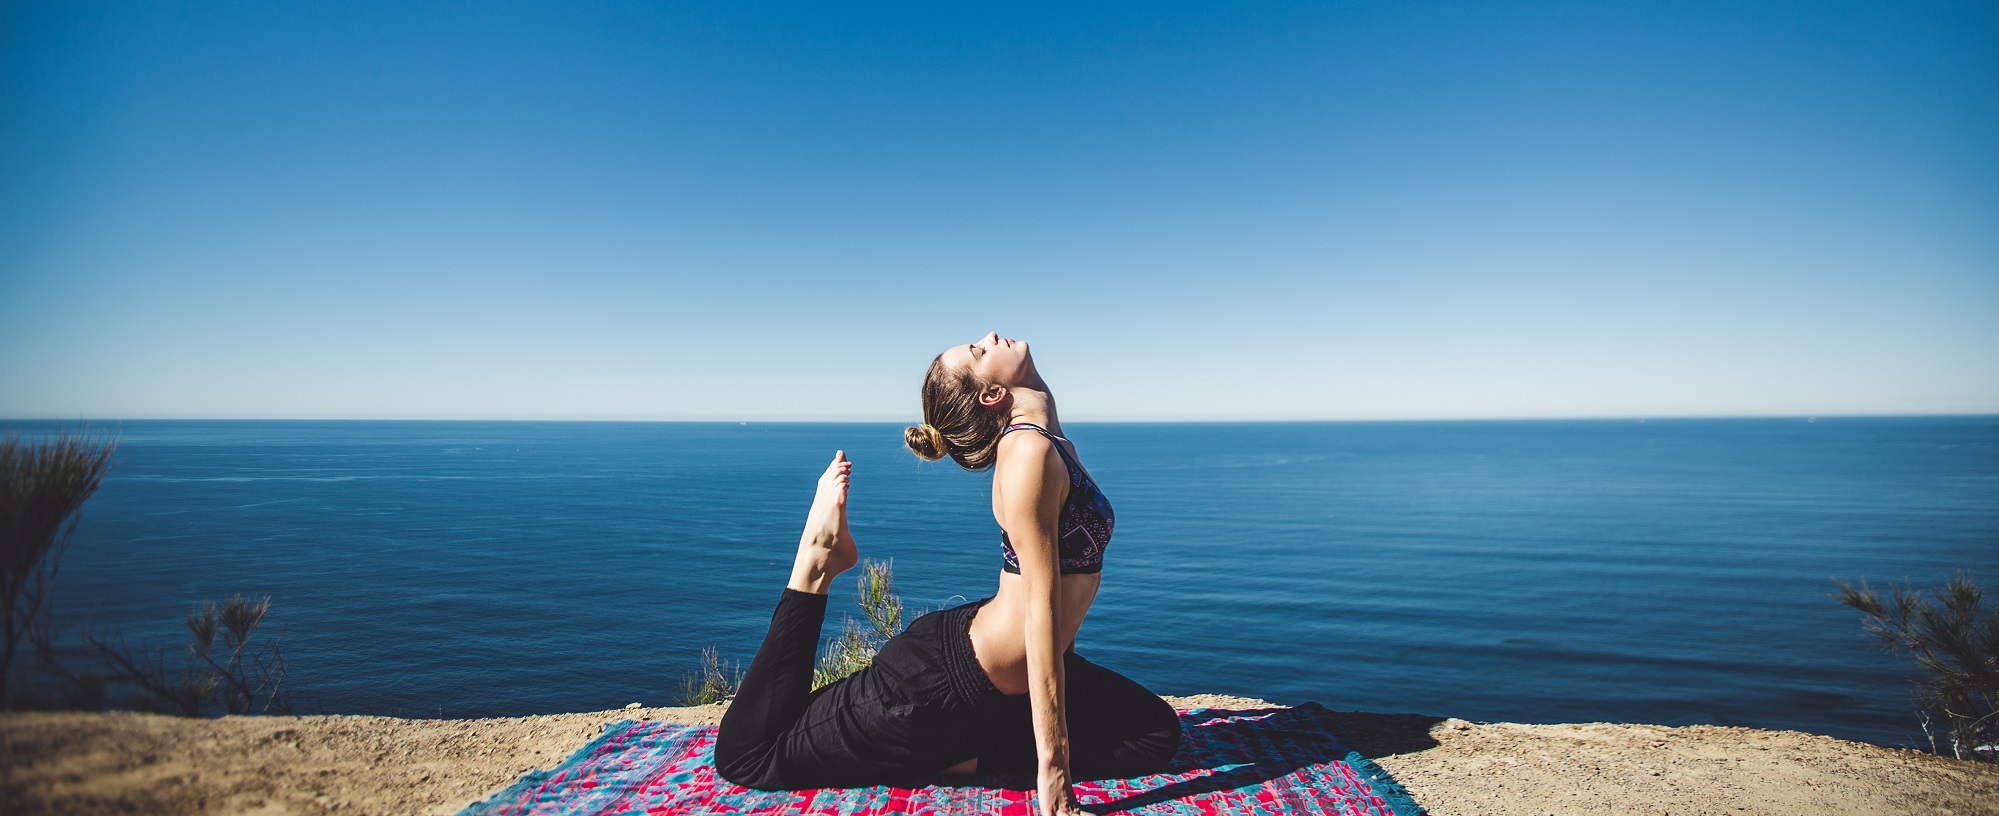 Photo of woman doing yoga by the ocean by Matthew Kane